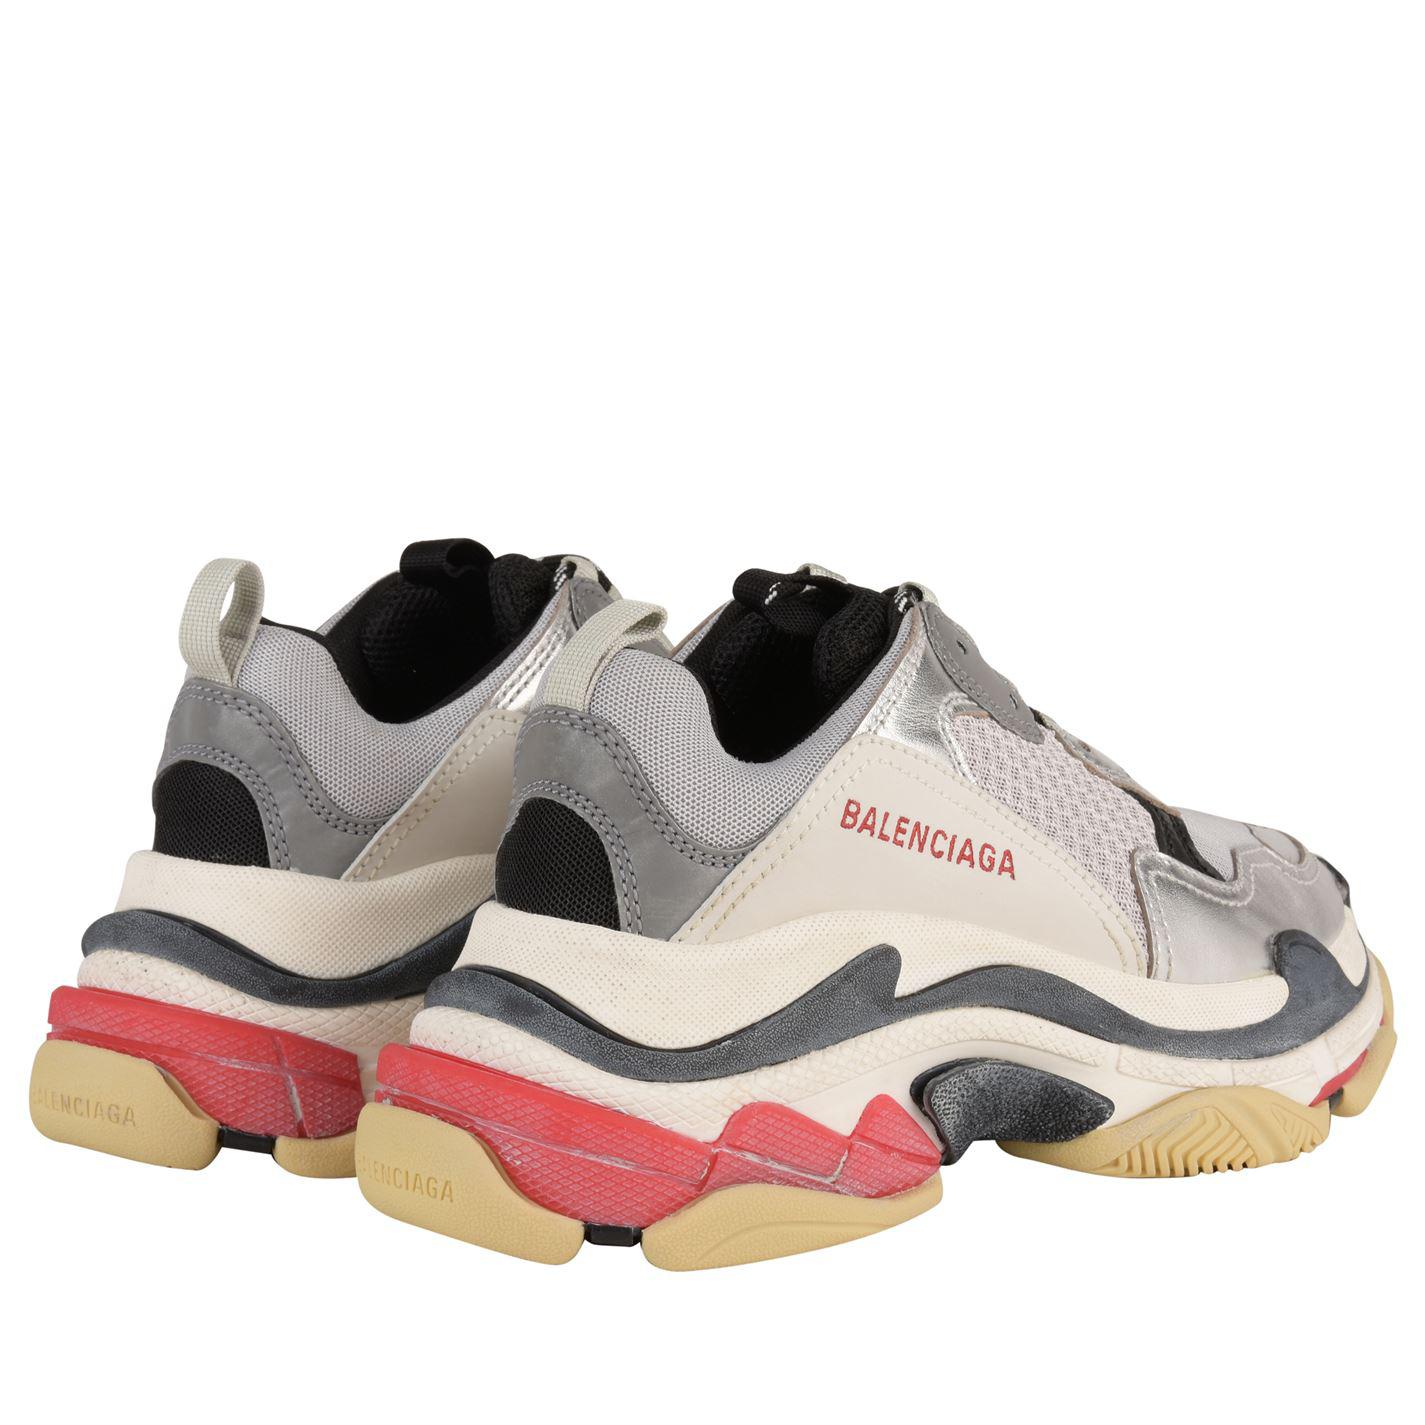 Balenciaga Shoes Triple S Size 43 Which is Like A 95